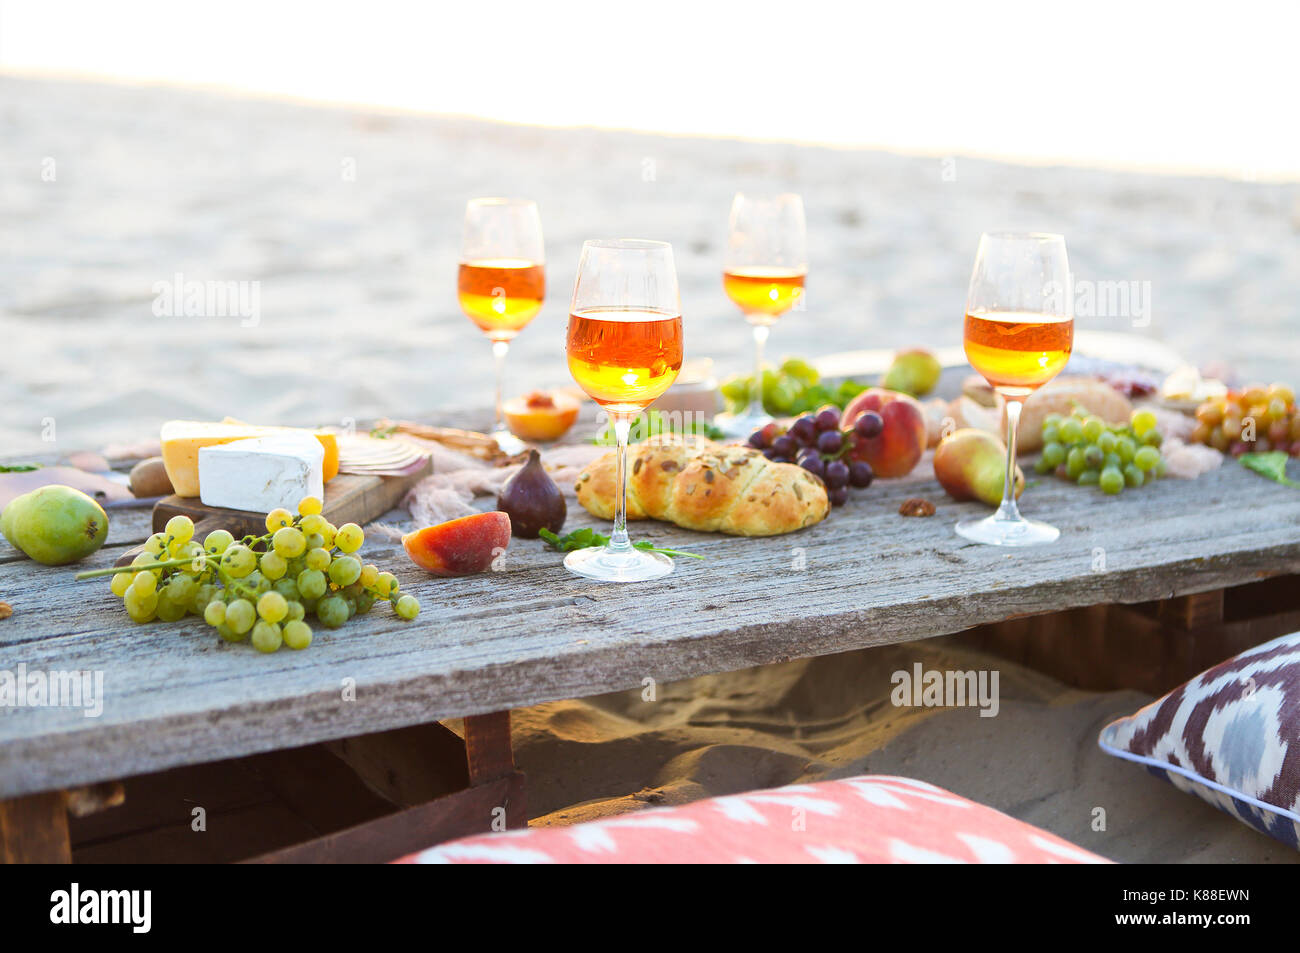 Beach picnic table with rose wine. Beach party Stock Photo - Alamy